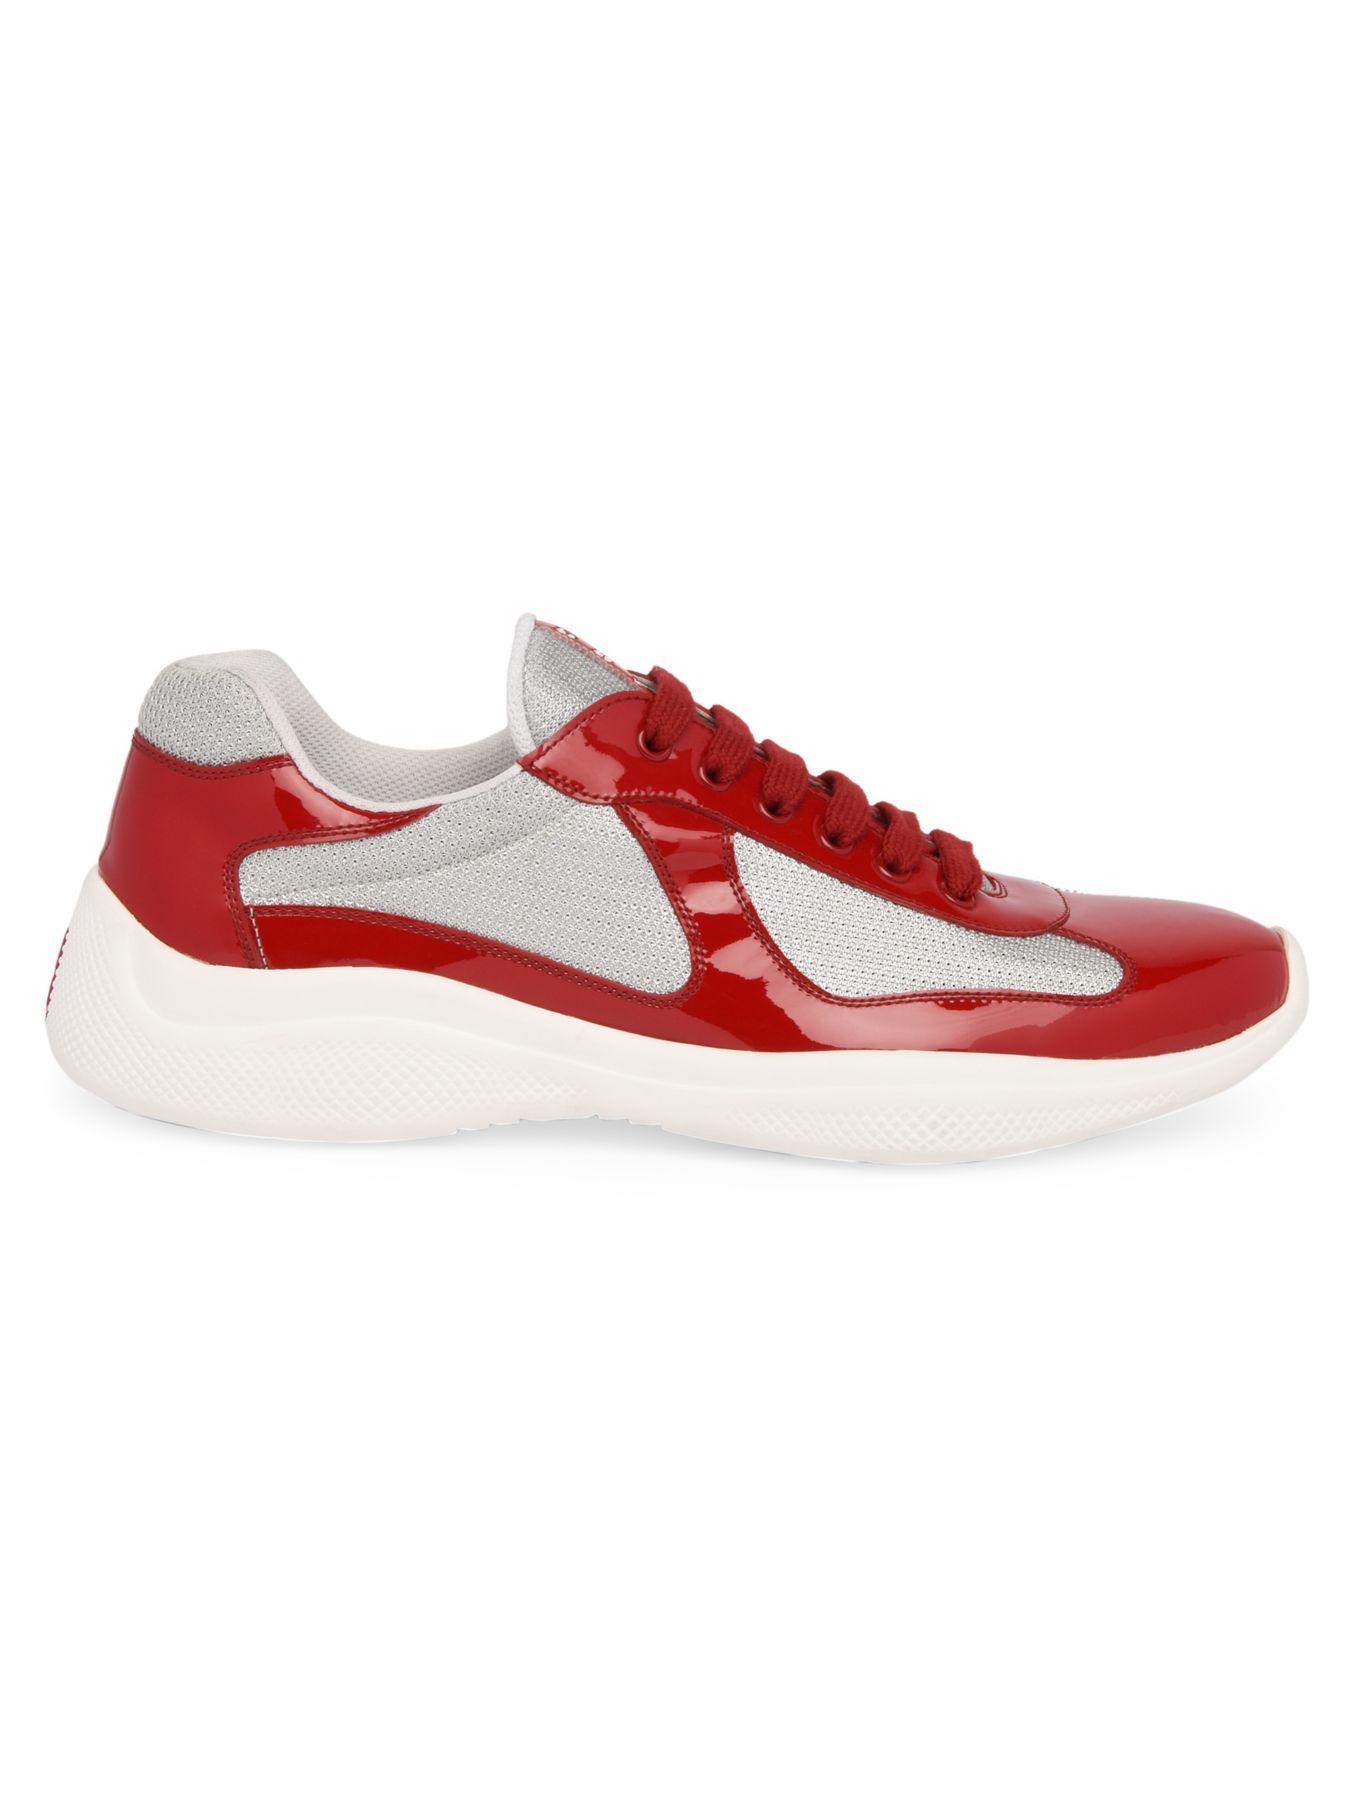 Prada Leather Americas Cup Sneakers in Red for Men - Save 58% - Lyst